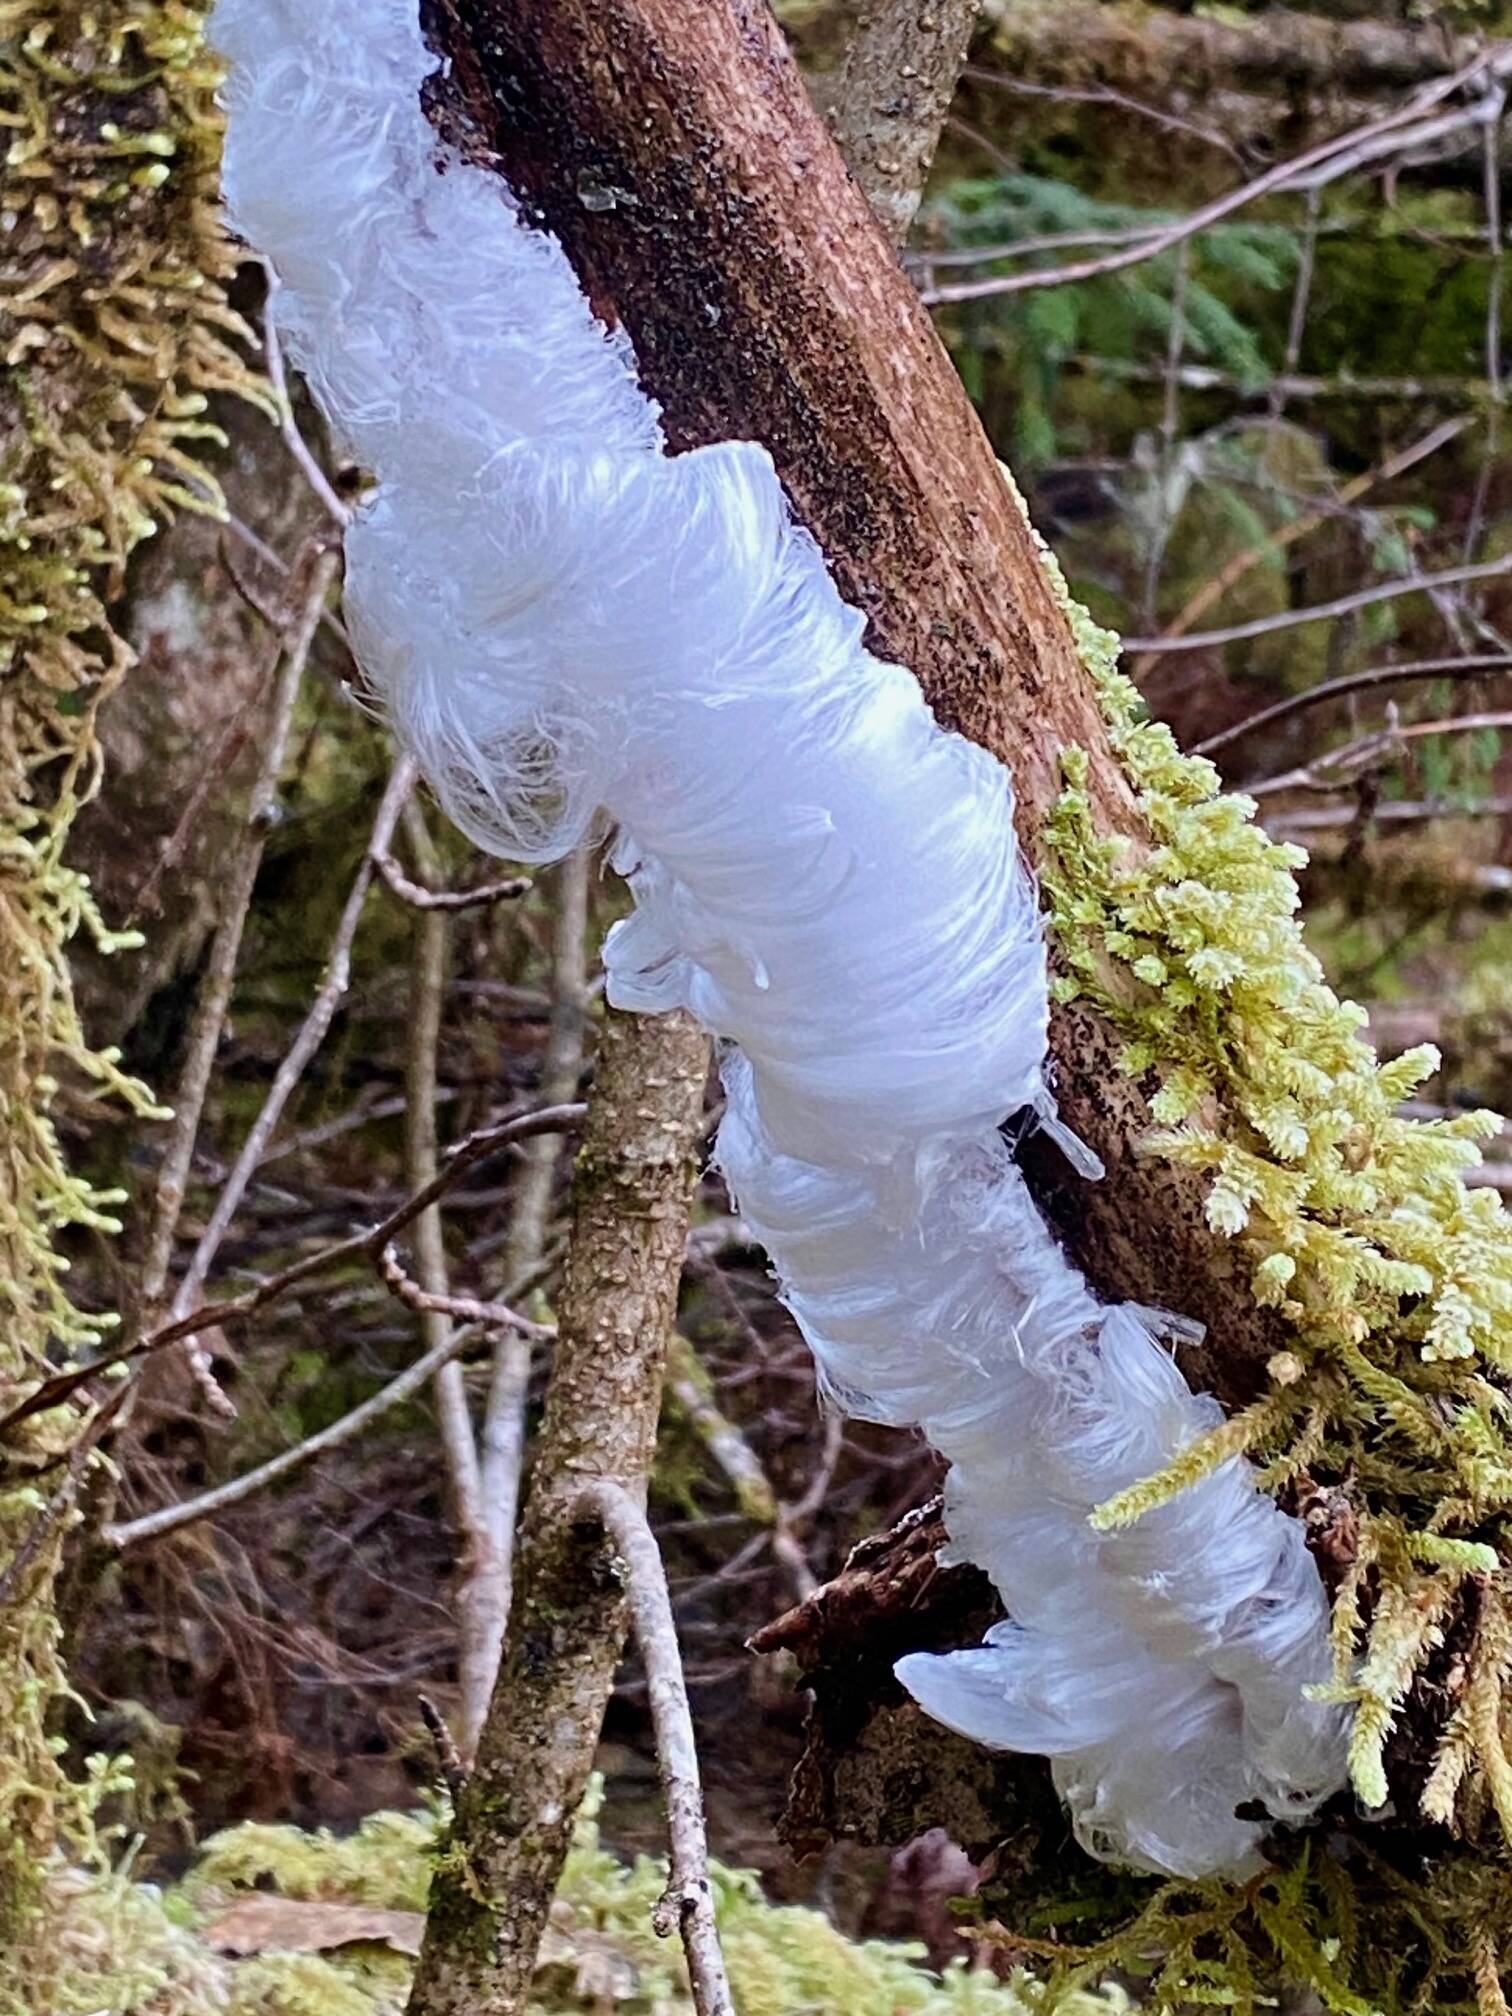 Delicate crystals resembling silky hair form on dead wood when a particular fungus is present on the East Glacier Trail on Nov. 29. (Photo by Denise Carroll)